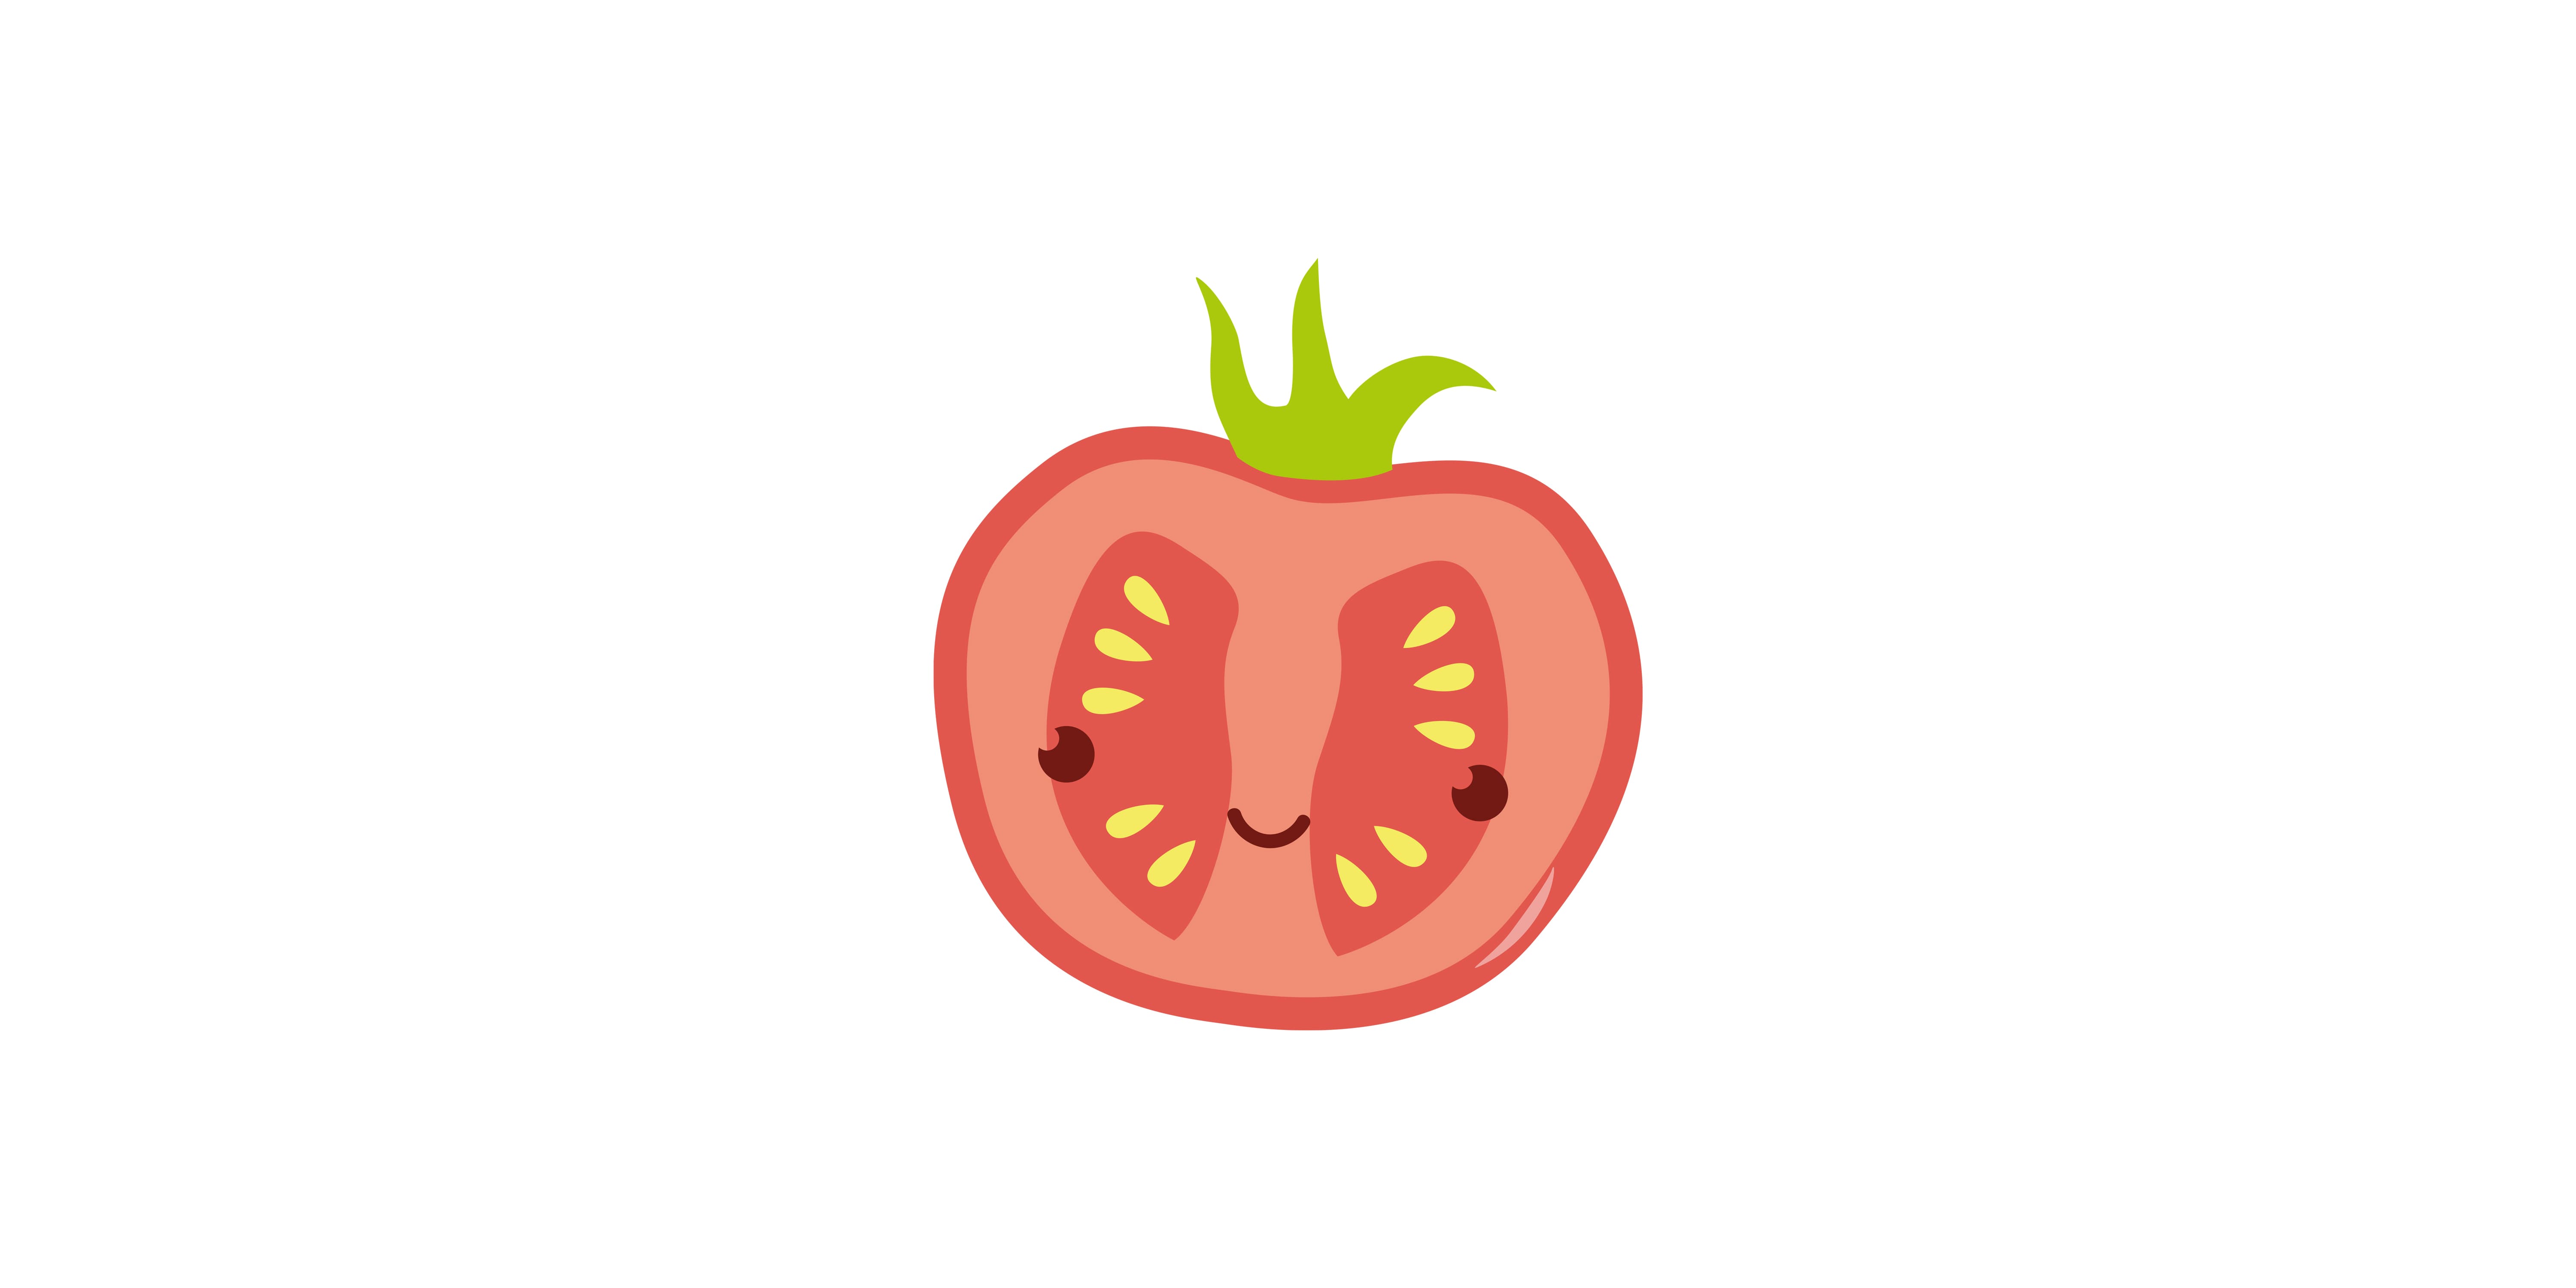 Your baby is now about the size of a small tomato.